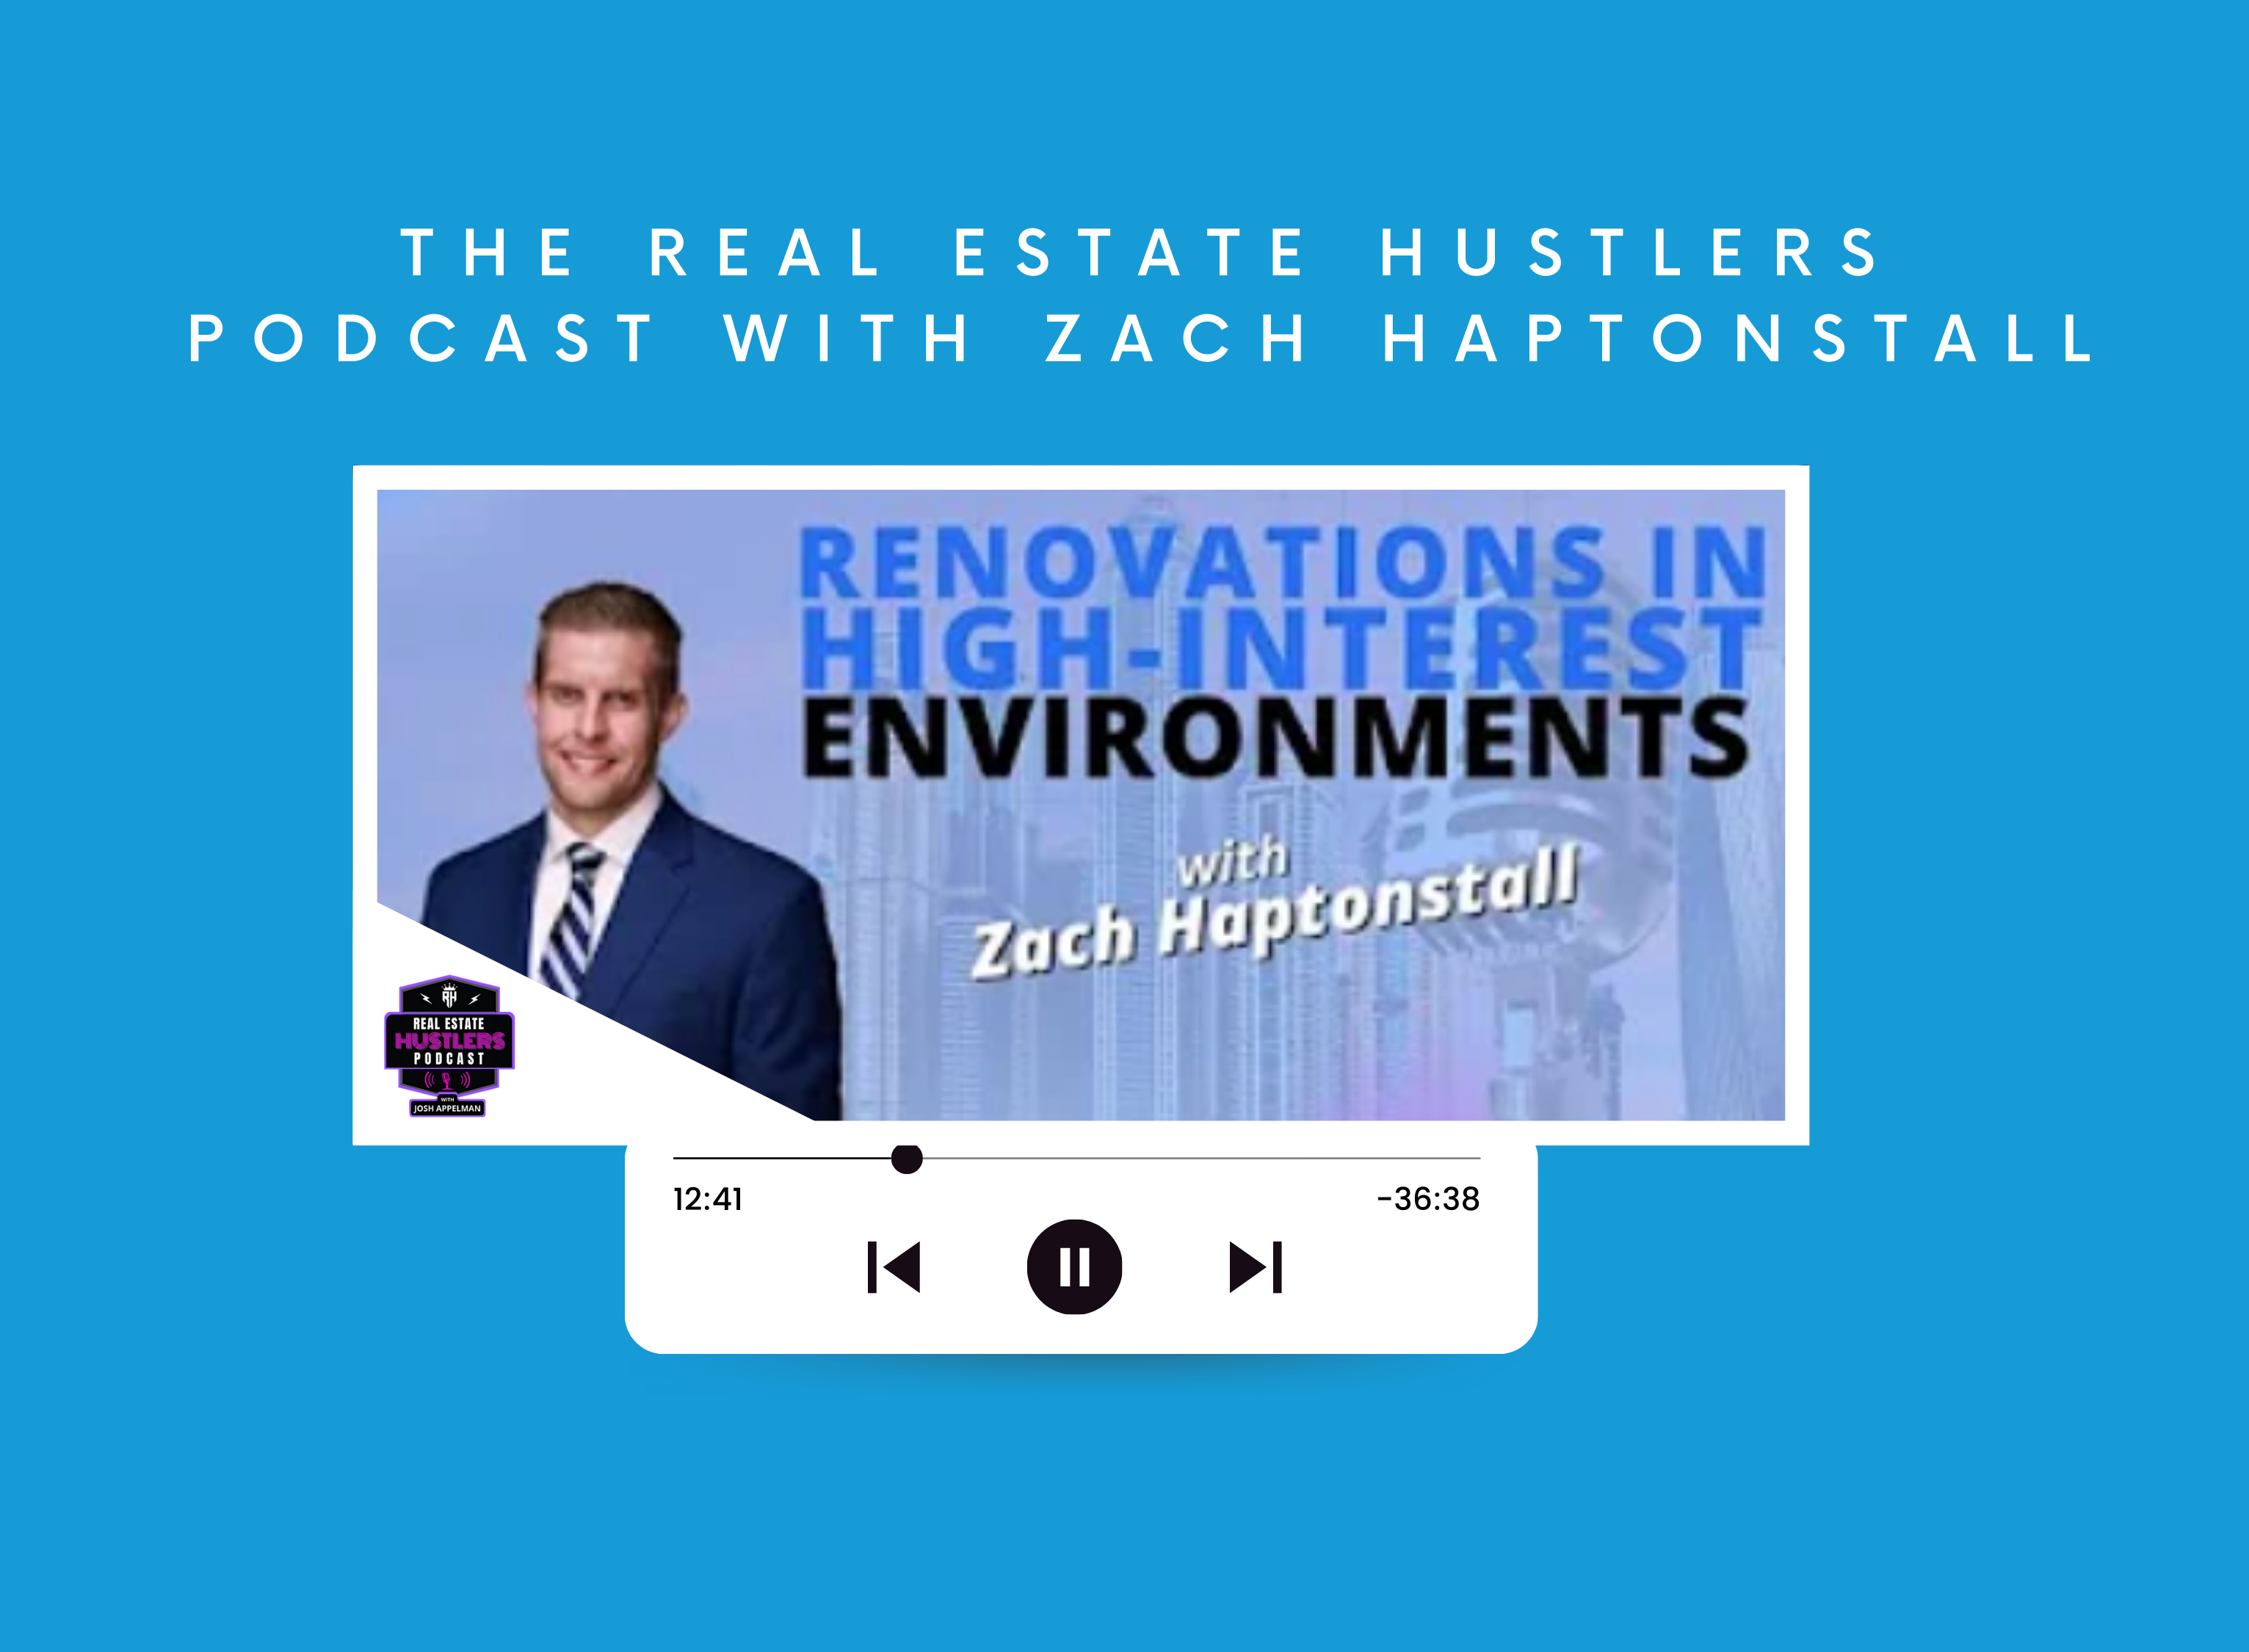 The Real Estate Hustlers Podcast